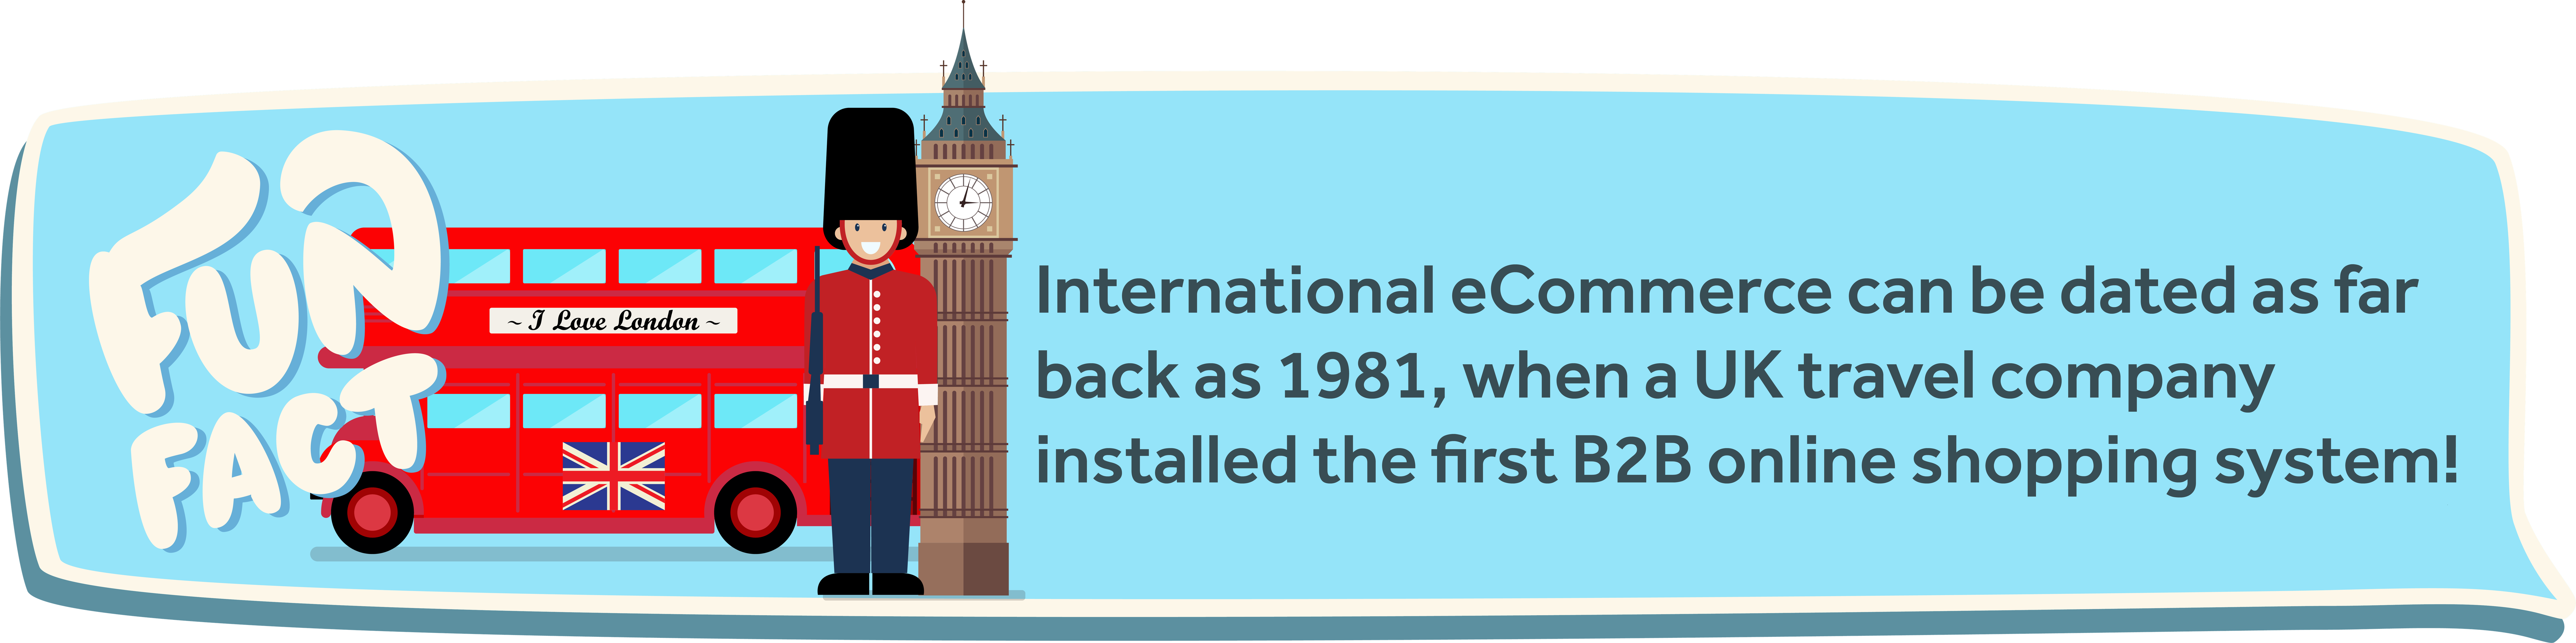 International eCommerce can be dated as far back as 1981, when a UK travel company installed the first B2B online shopping system!